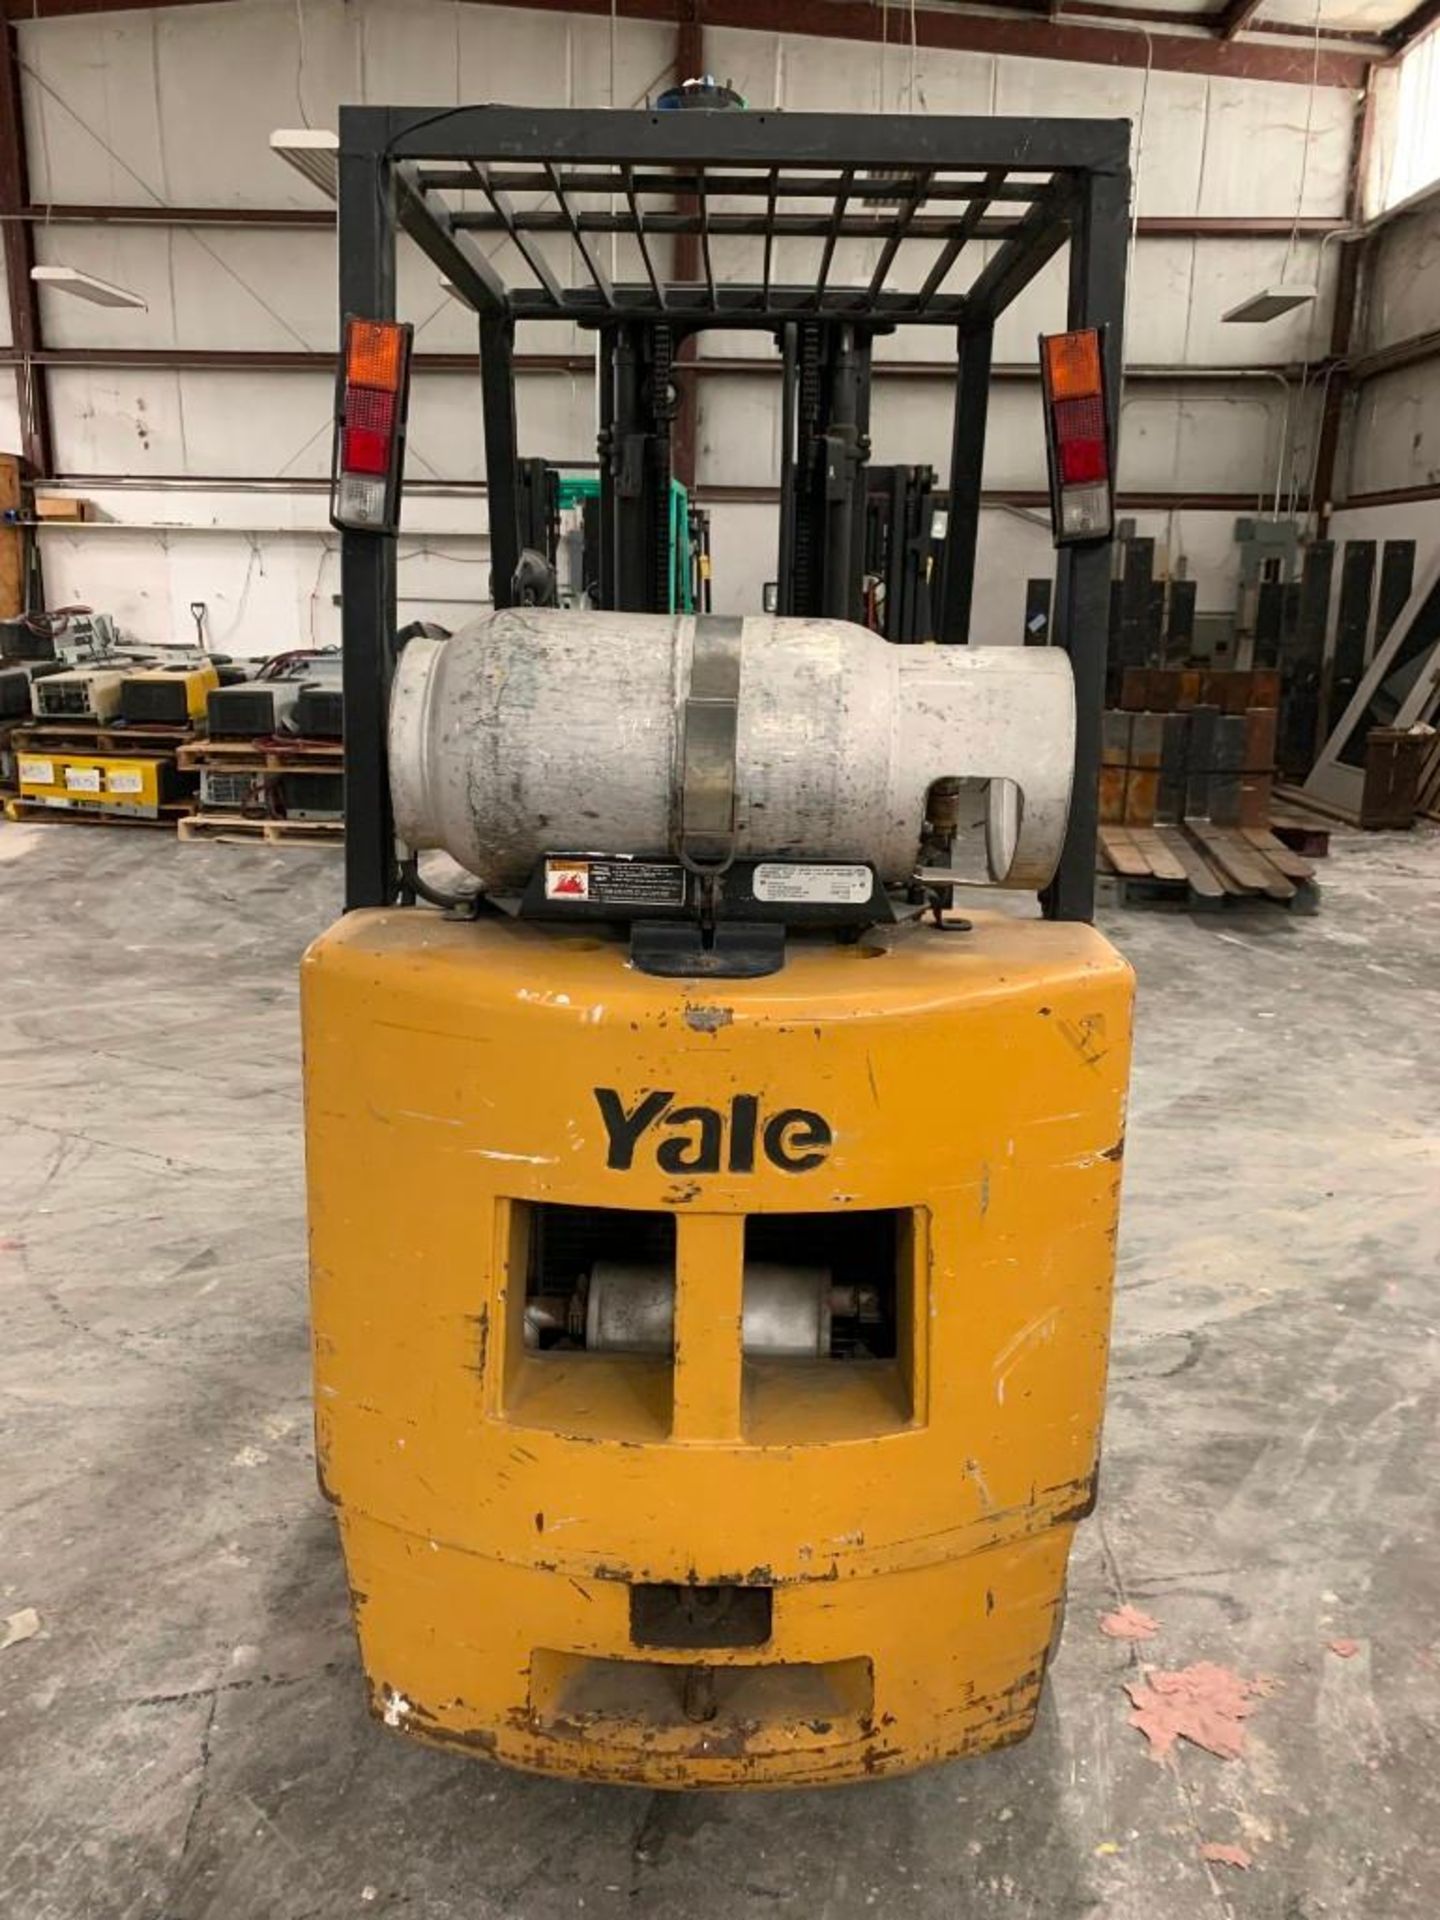 YALE 4,000 LB. CAPACITY FORKLIFT, MODEL GLC040, S/N N593043, LPG, SOLID NON-MARKING TIRES, 3-STAGE M - Image 4 of 7